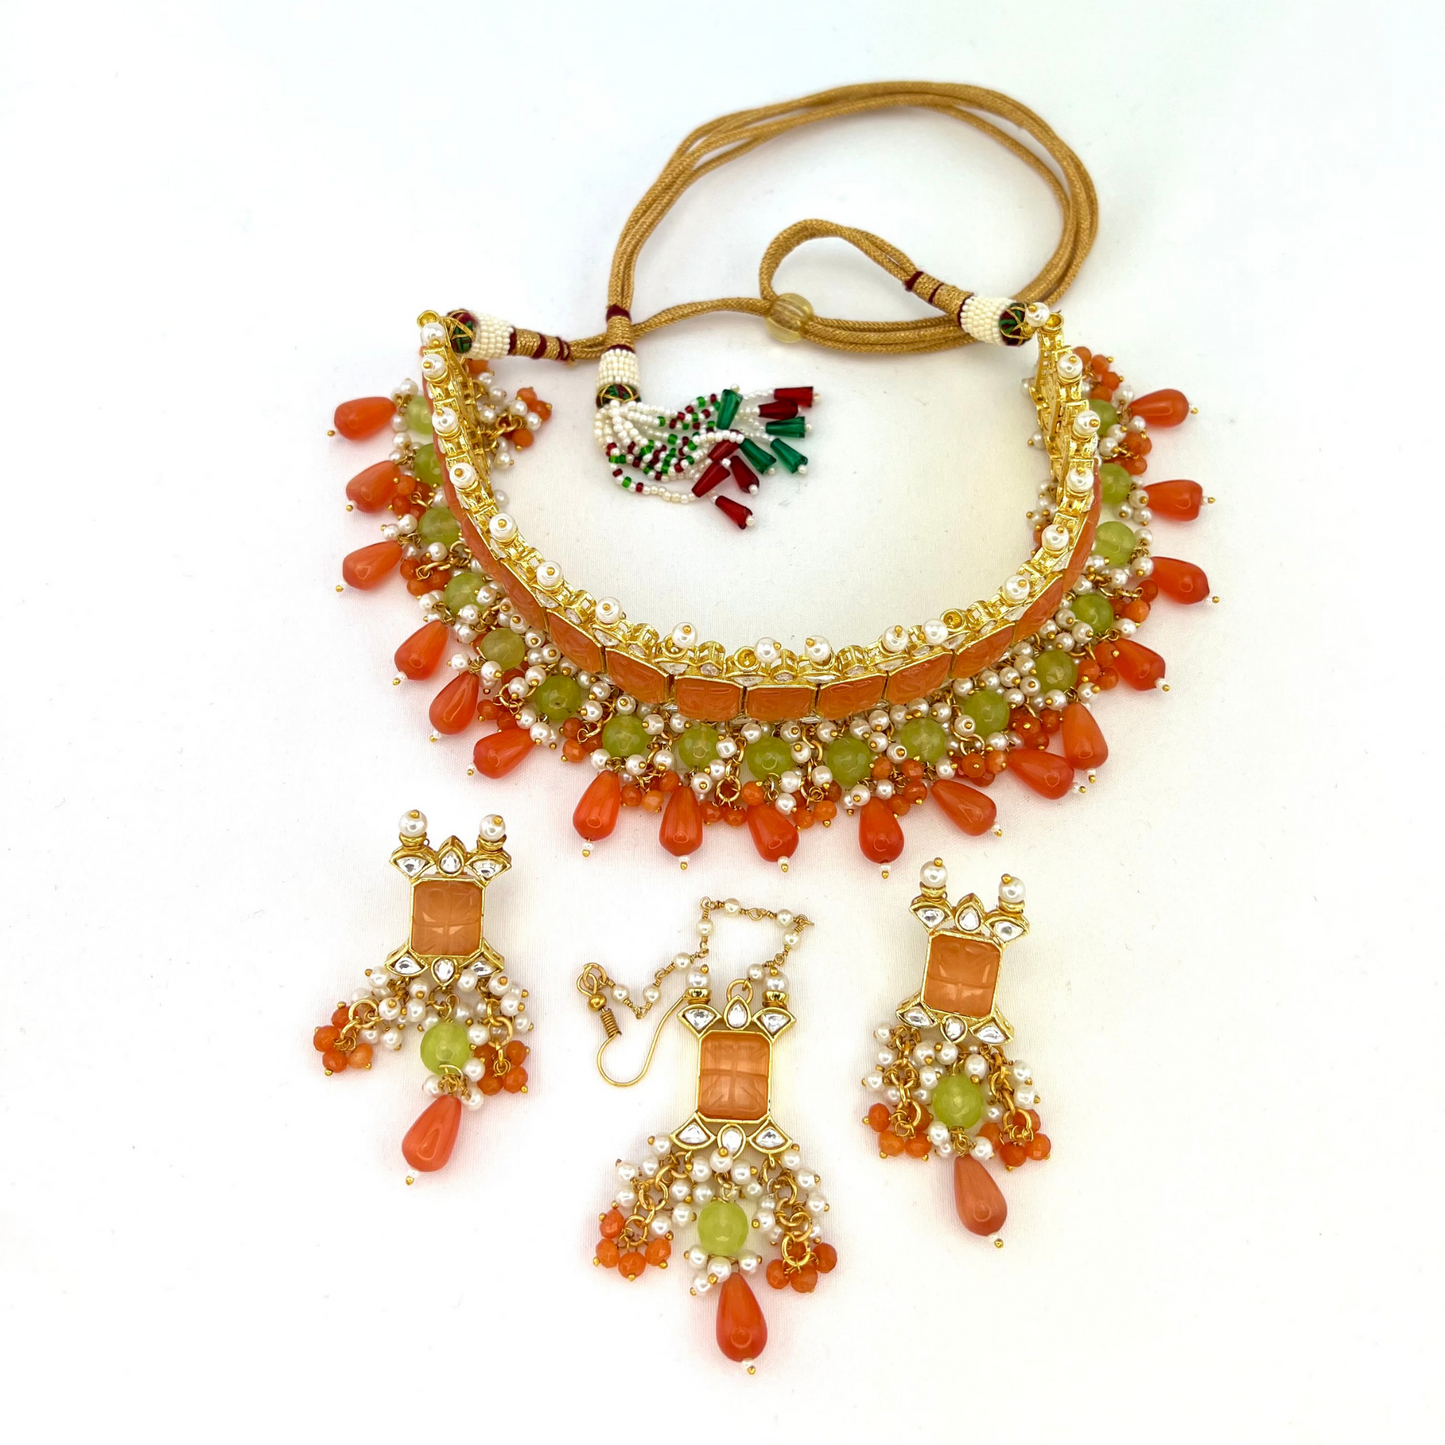 Choker set with with peach, clear stones and green, peach and orange beads,  Set includes choker, tikka and earrings.  Prefect for Indian weddings, parties and special occasions.  Latest 2022 fashion. High end Indian fashion jewellery with top quality stones and beads.